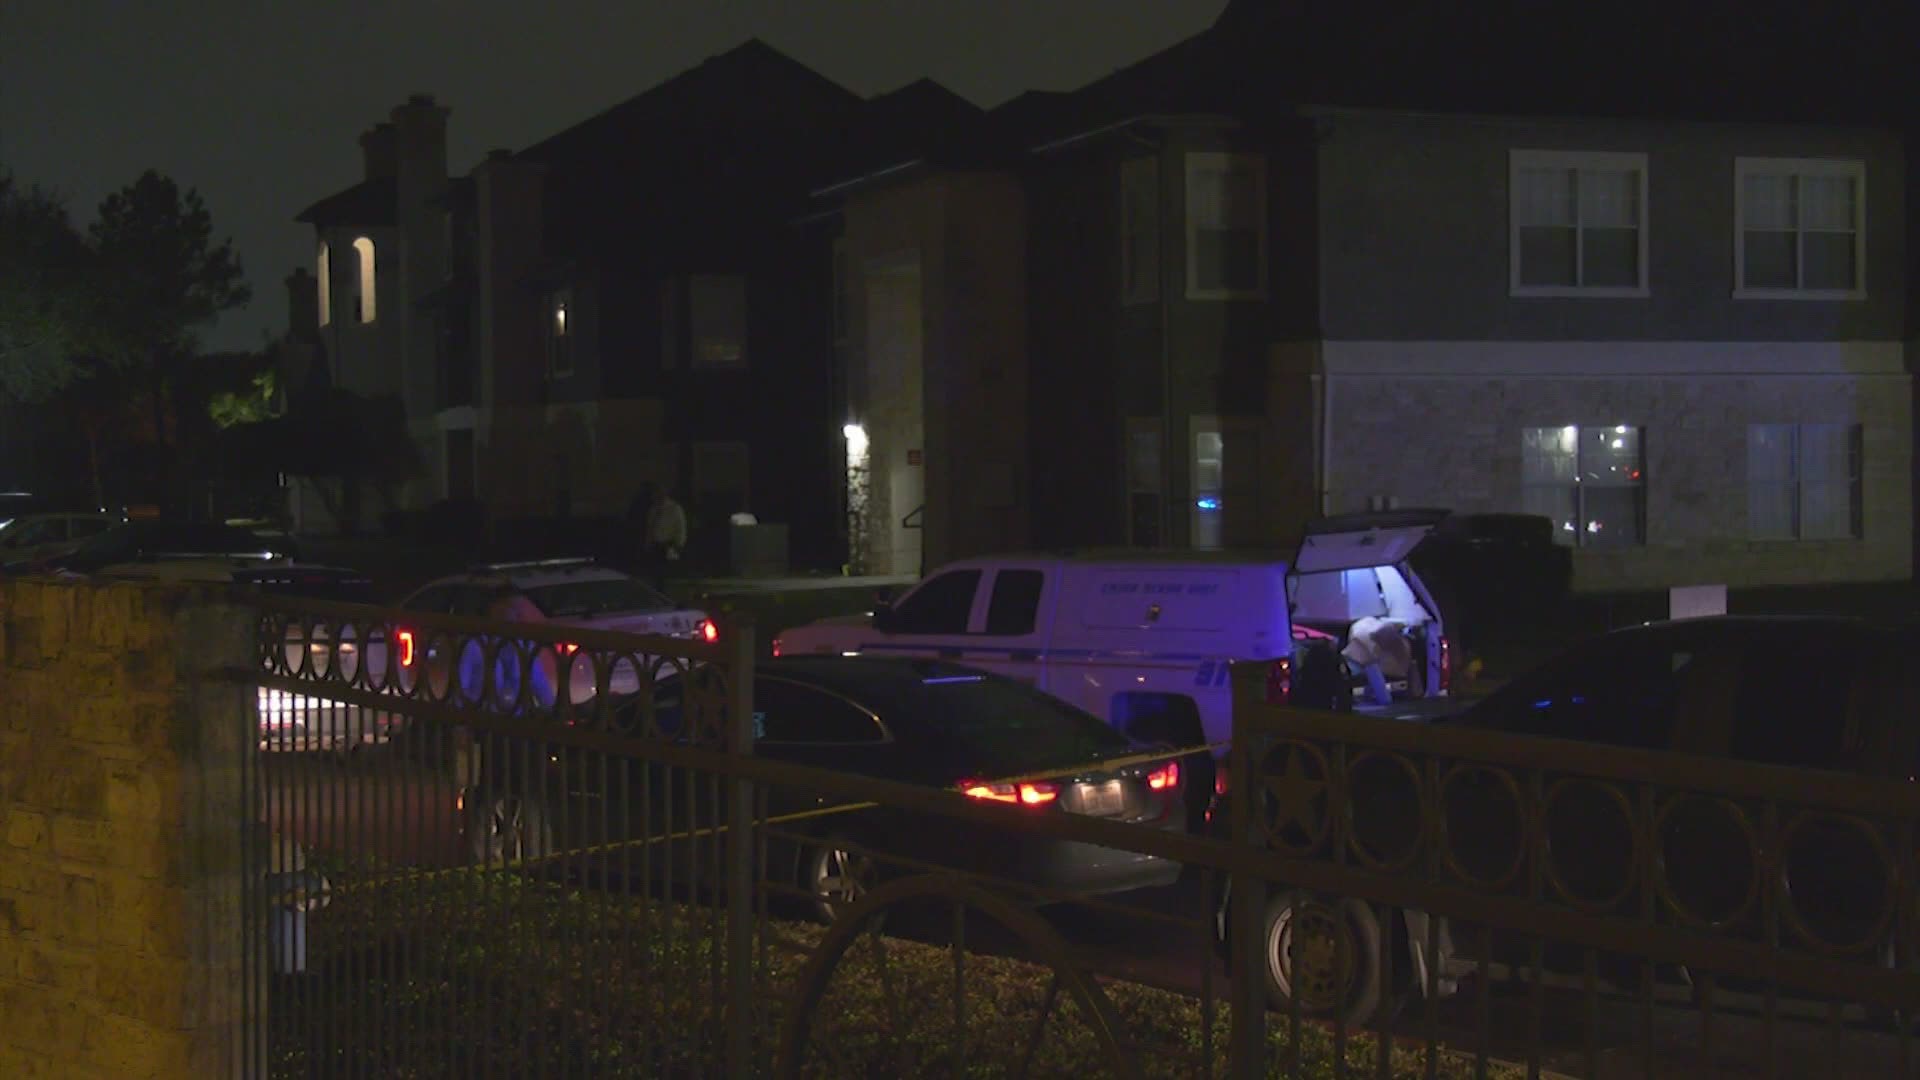 Harris County Sheriff’s deputies are investigating a shooting that left one man dead Saturday night at an apartment complex in northwest Harris County.